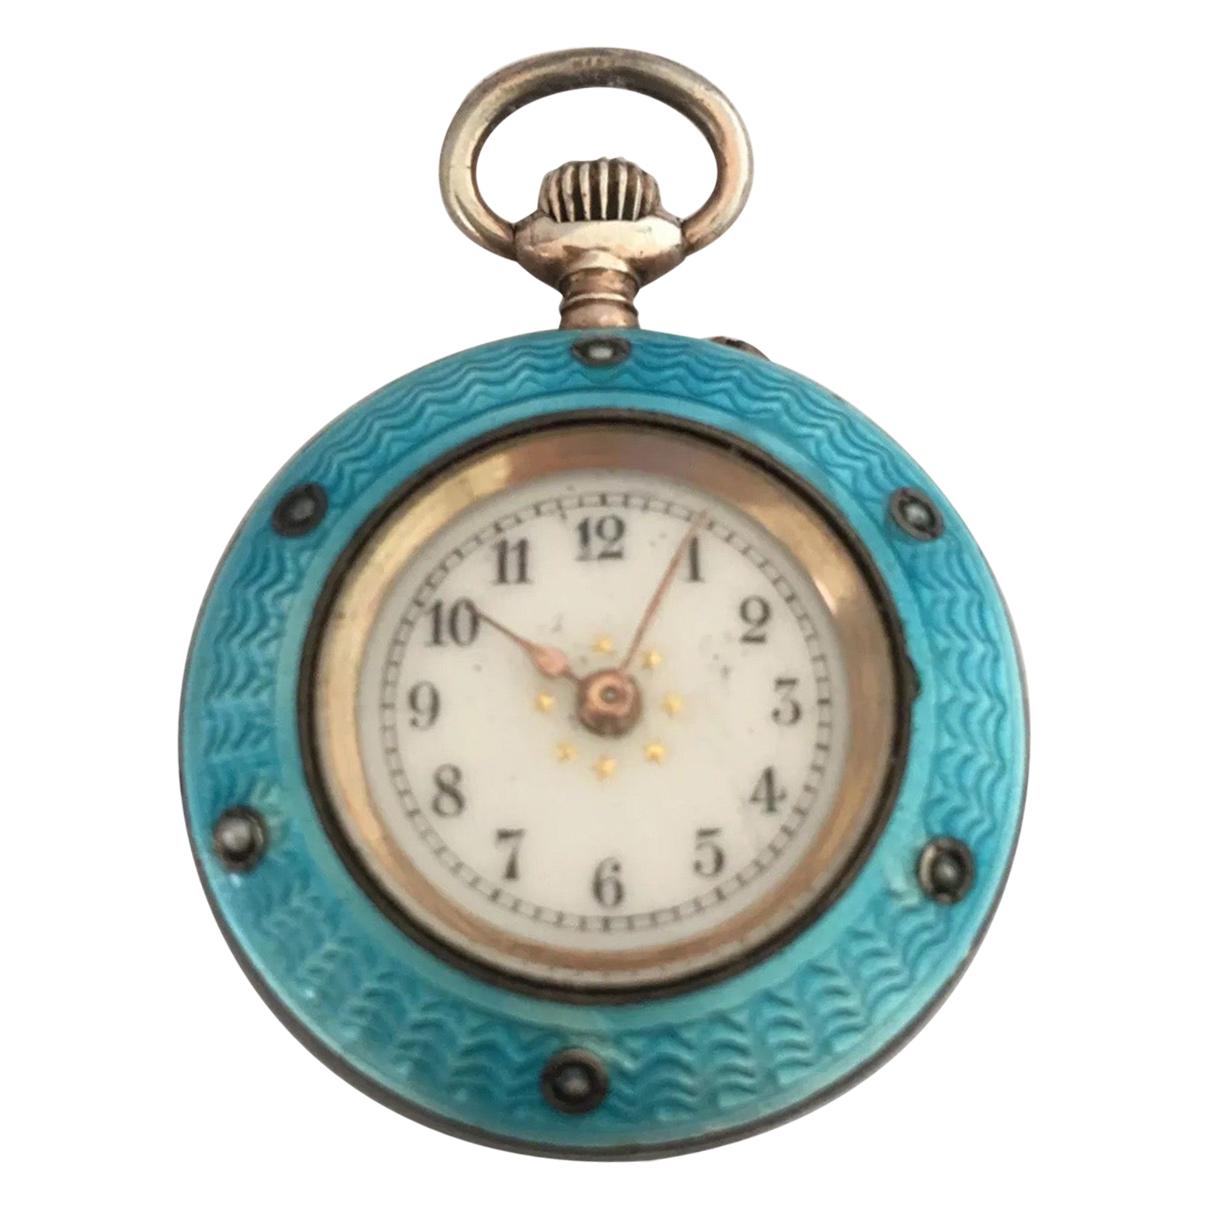 Antique Turquoise or Blue Enamel Silver Fob Watch